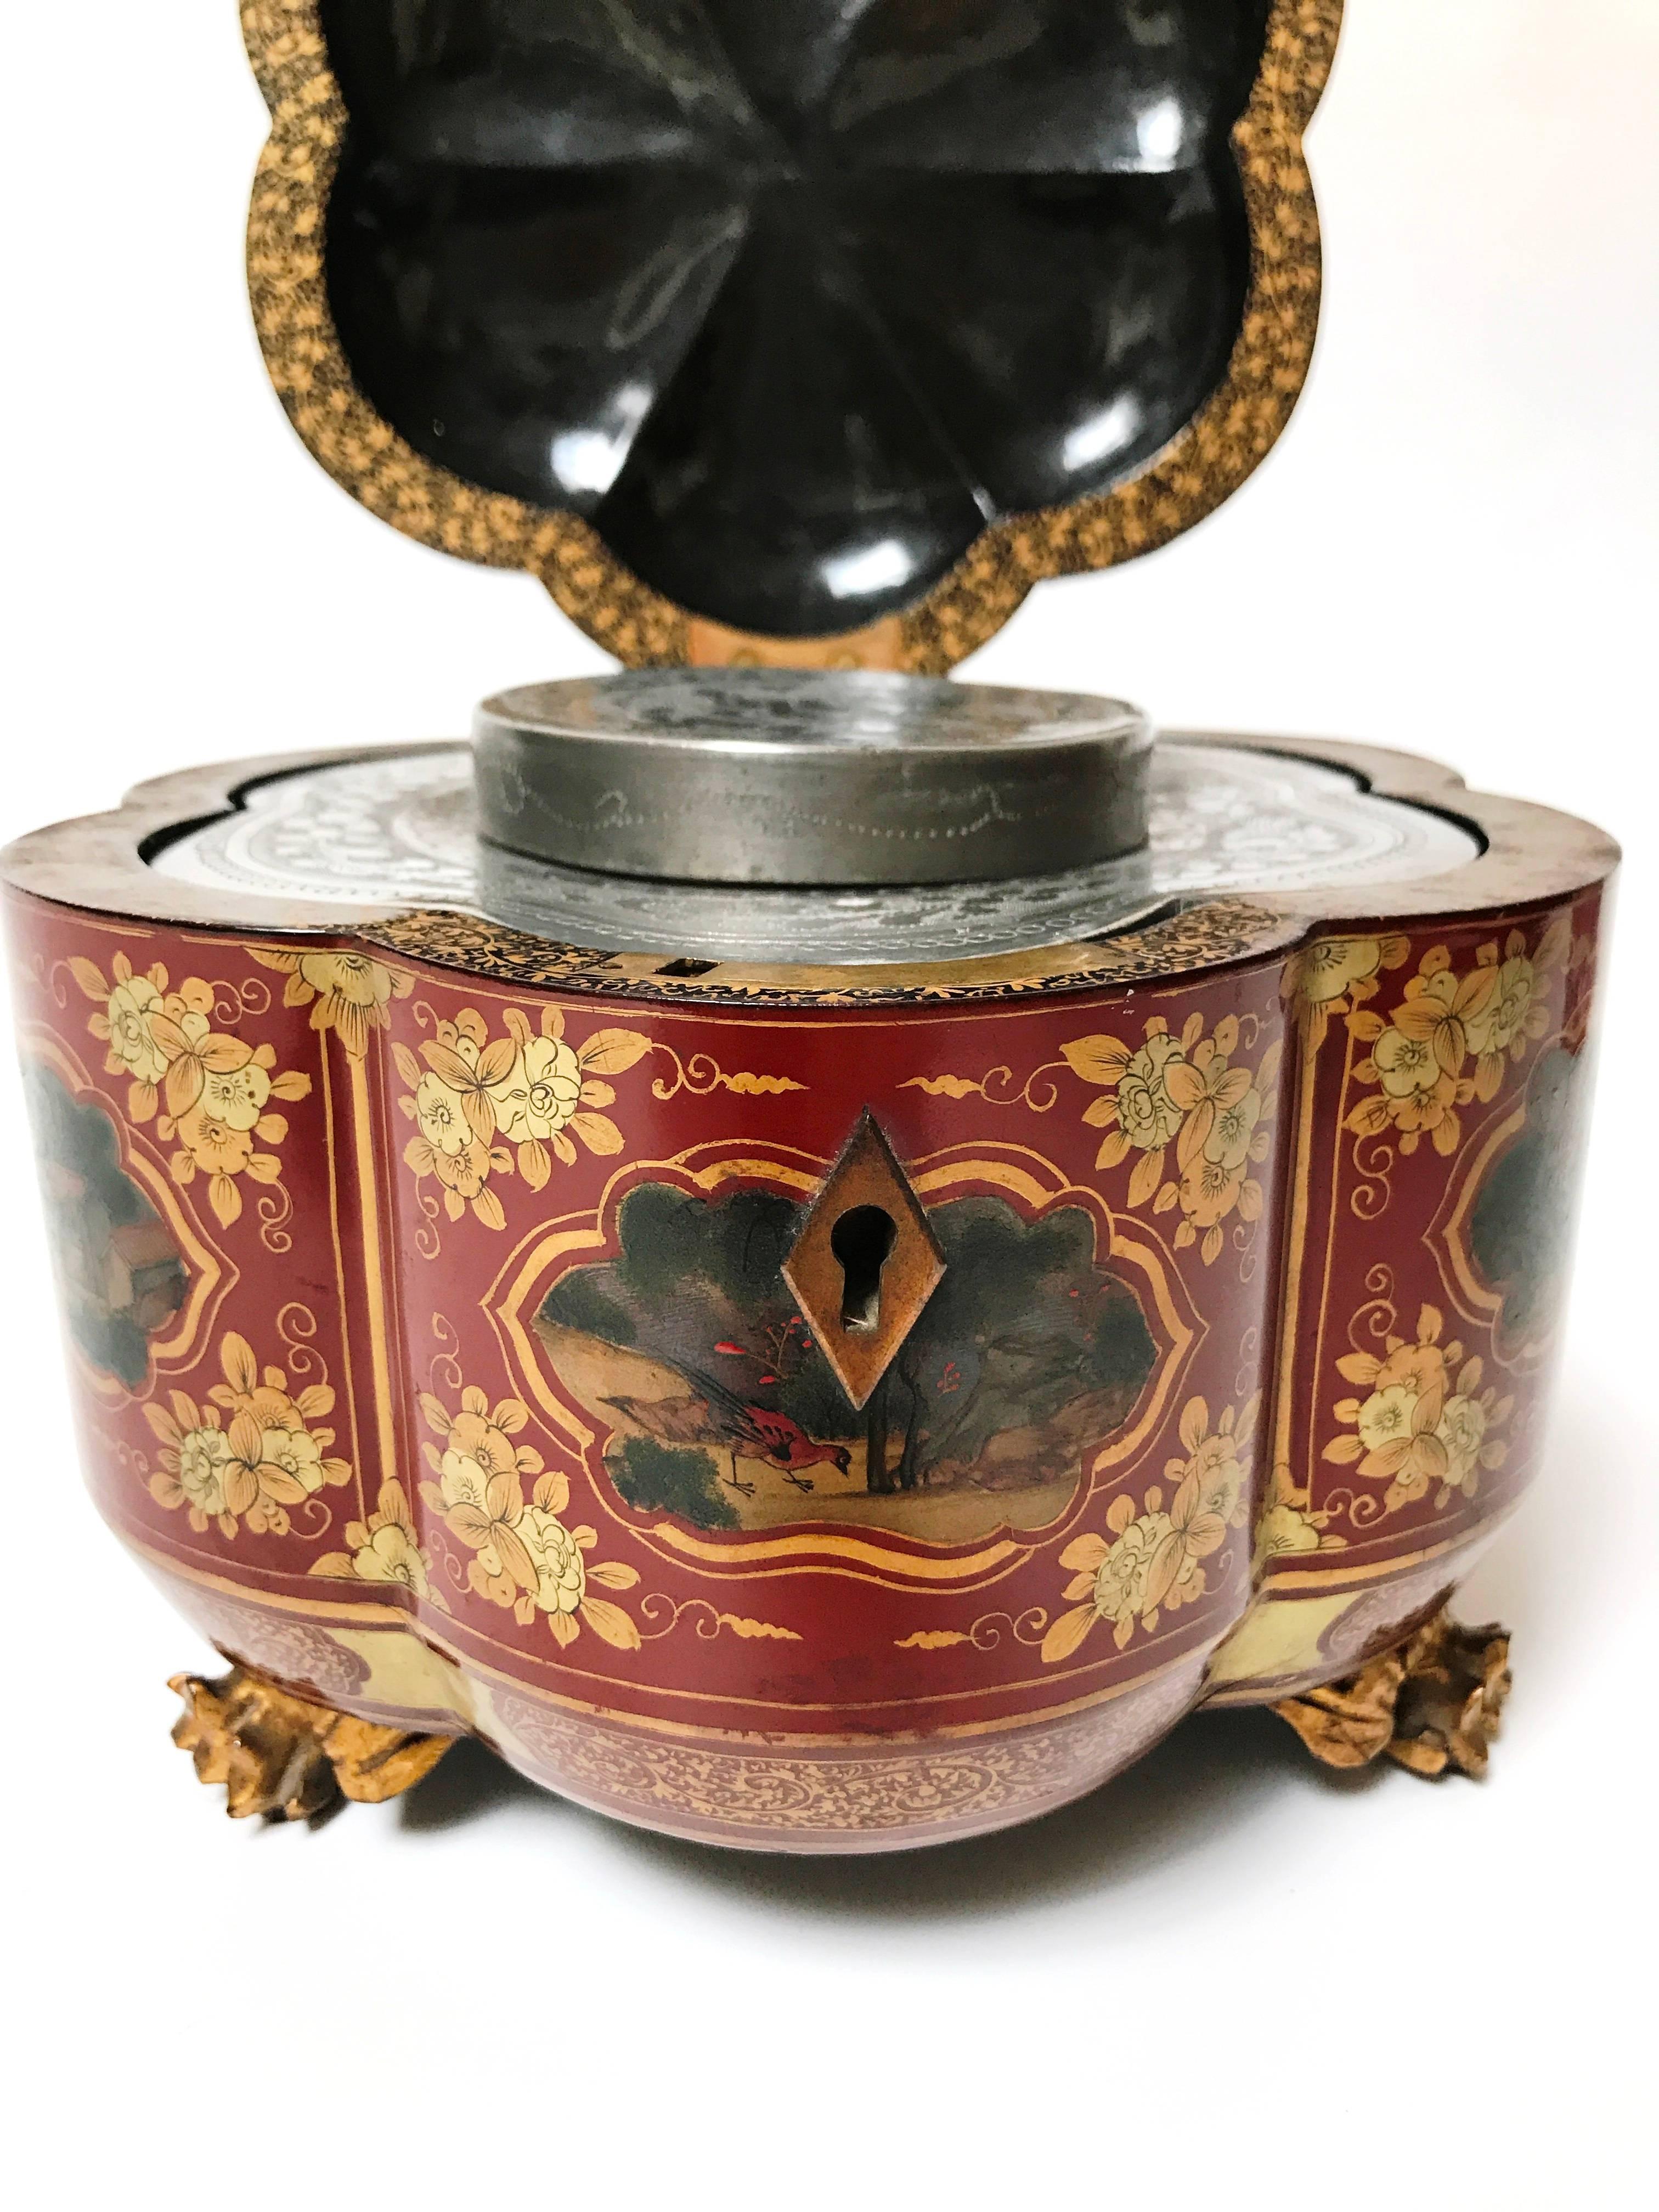 19th Century Chinese Export Melon Form Tea Caddy